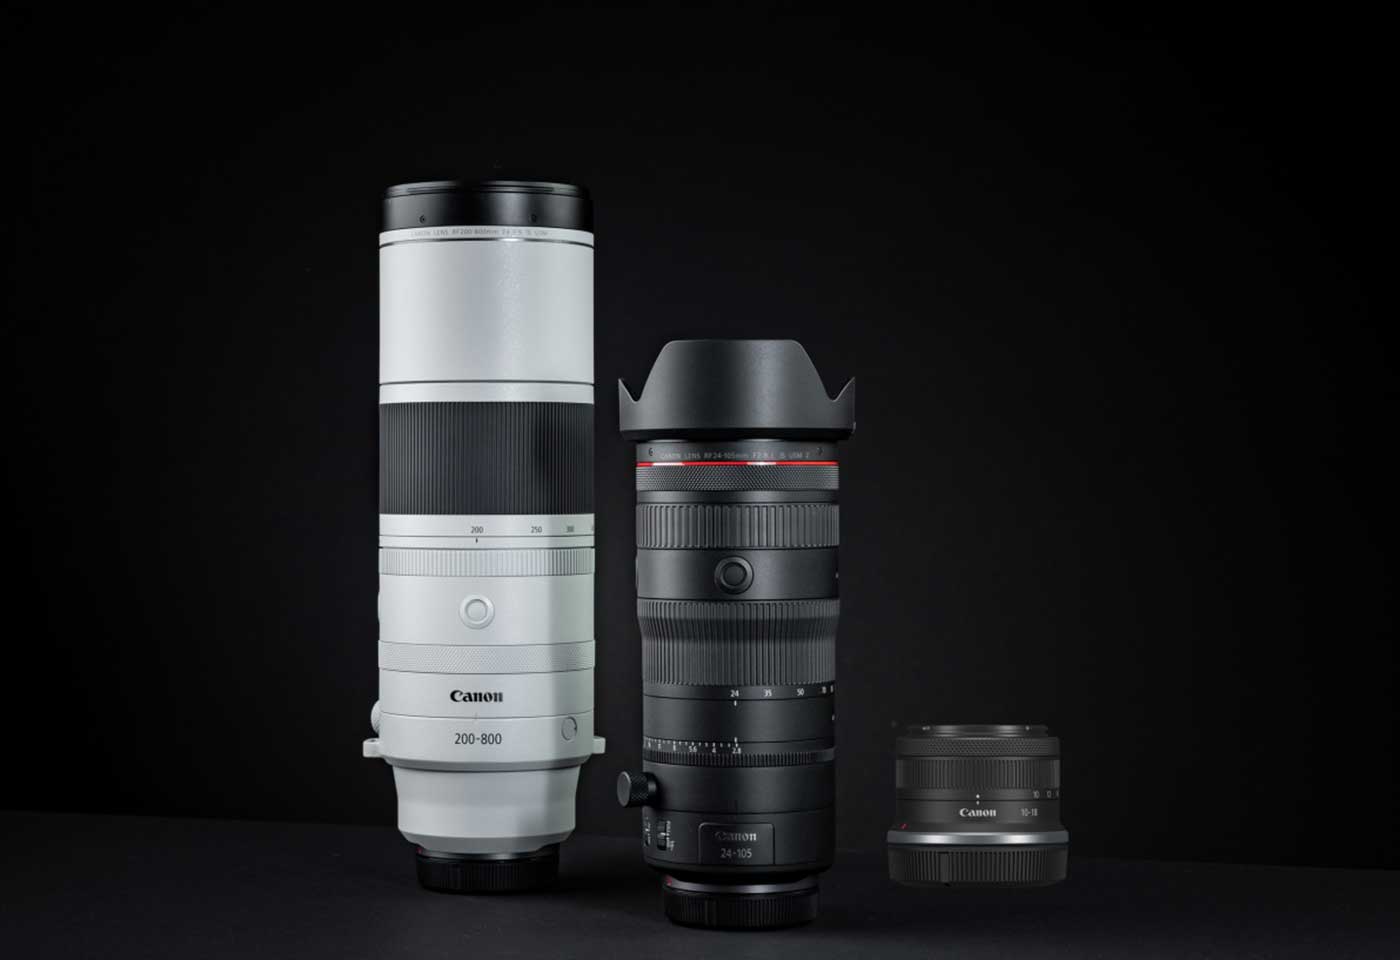 RF 200-800mm f/6.3-9 IS USM, RF 24-105mm f/2.8L IS USM Z lens, and RF-S 10-18mm f/4.5-6.3 IS STM